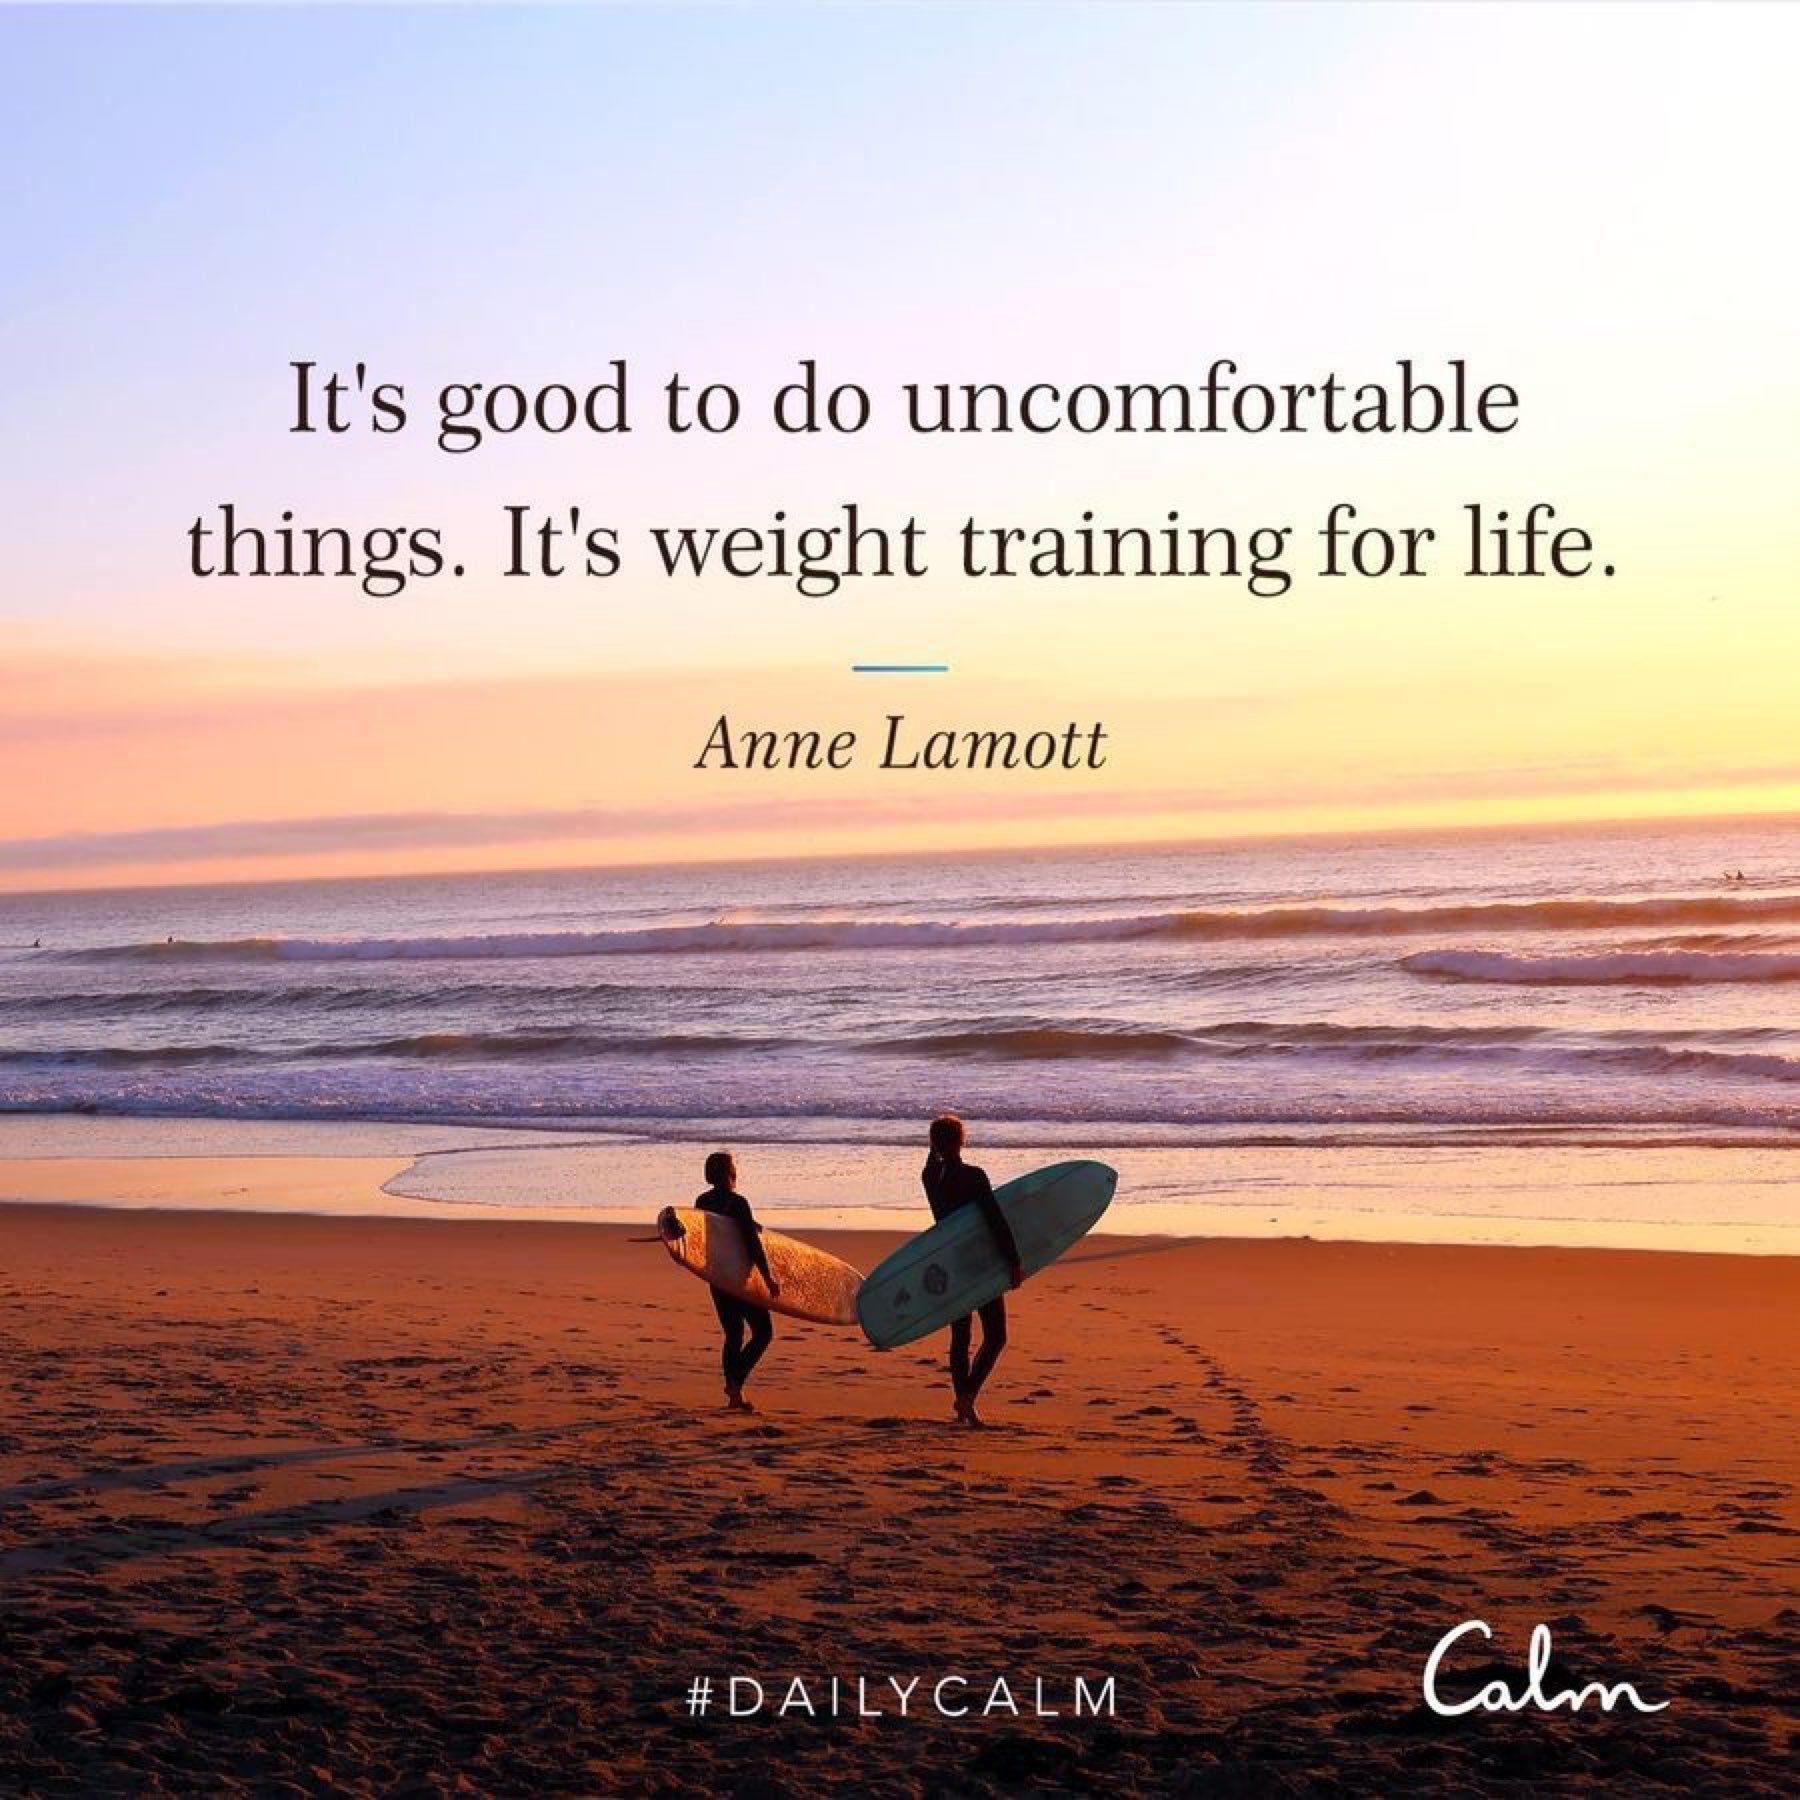 It's good to do uncomfortable things. It's weight training for life.